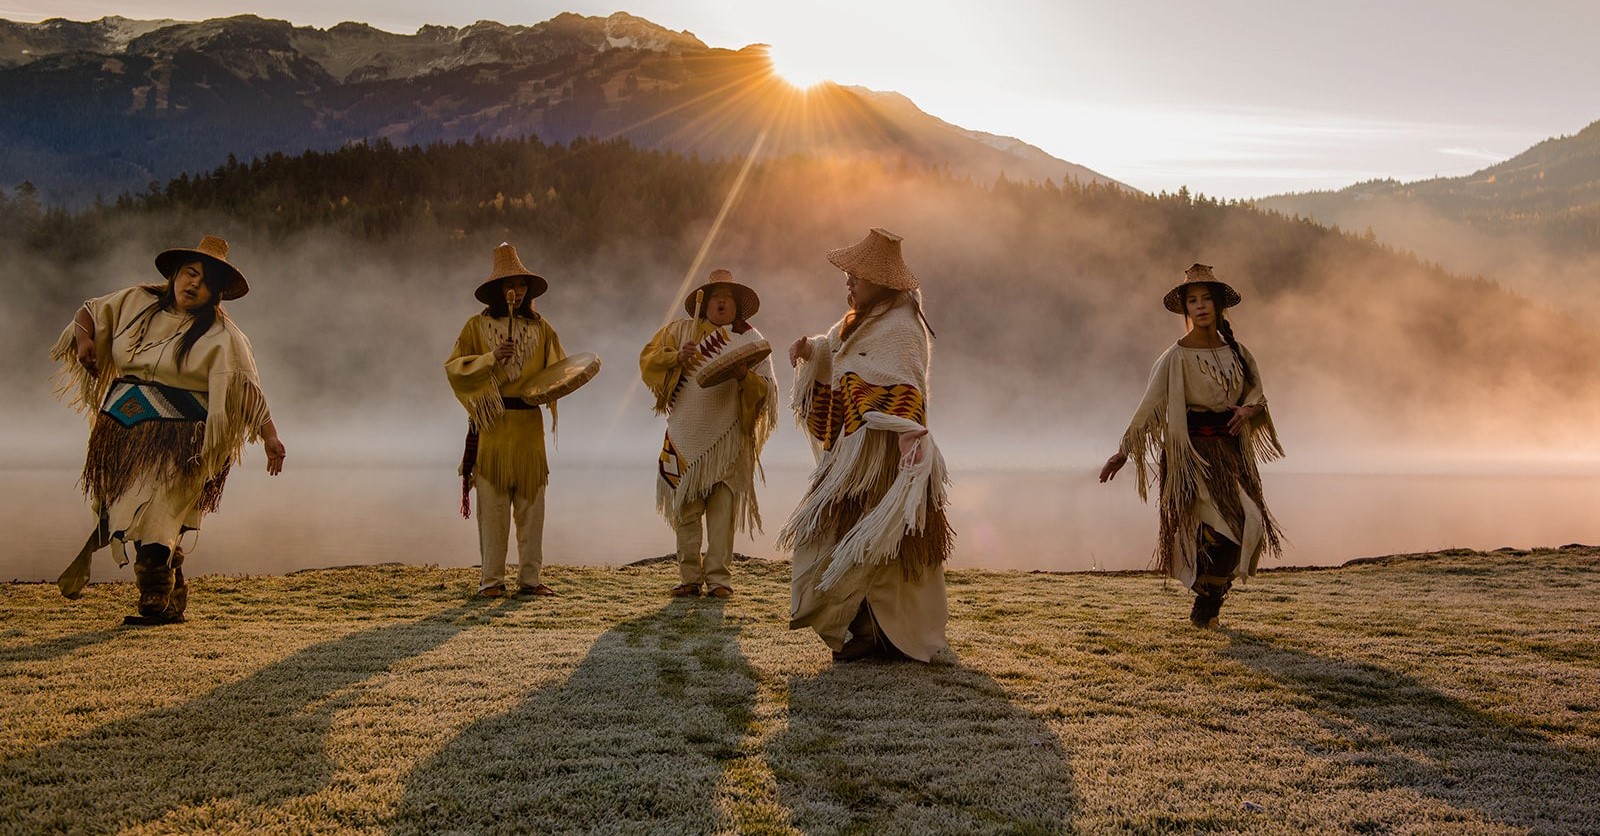 Five Indigenous people in traditional attire dance and play drums in a field with mist rising and the sun peeking over the mountains in the distance